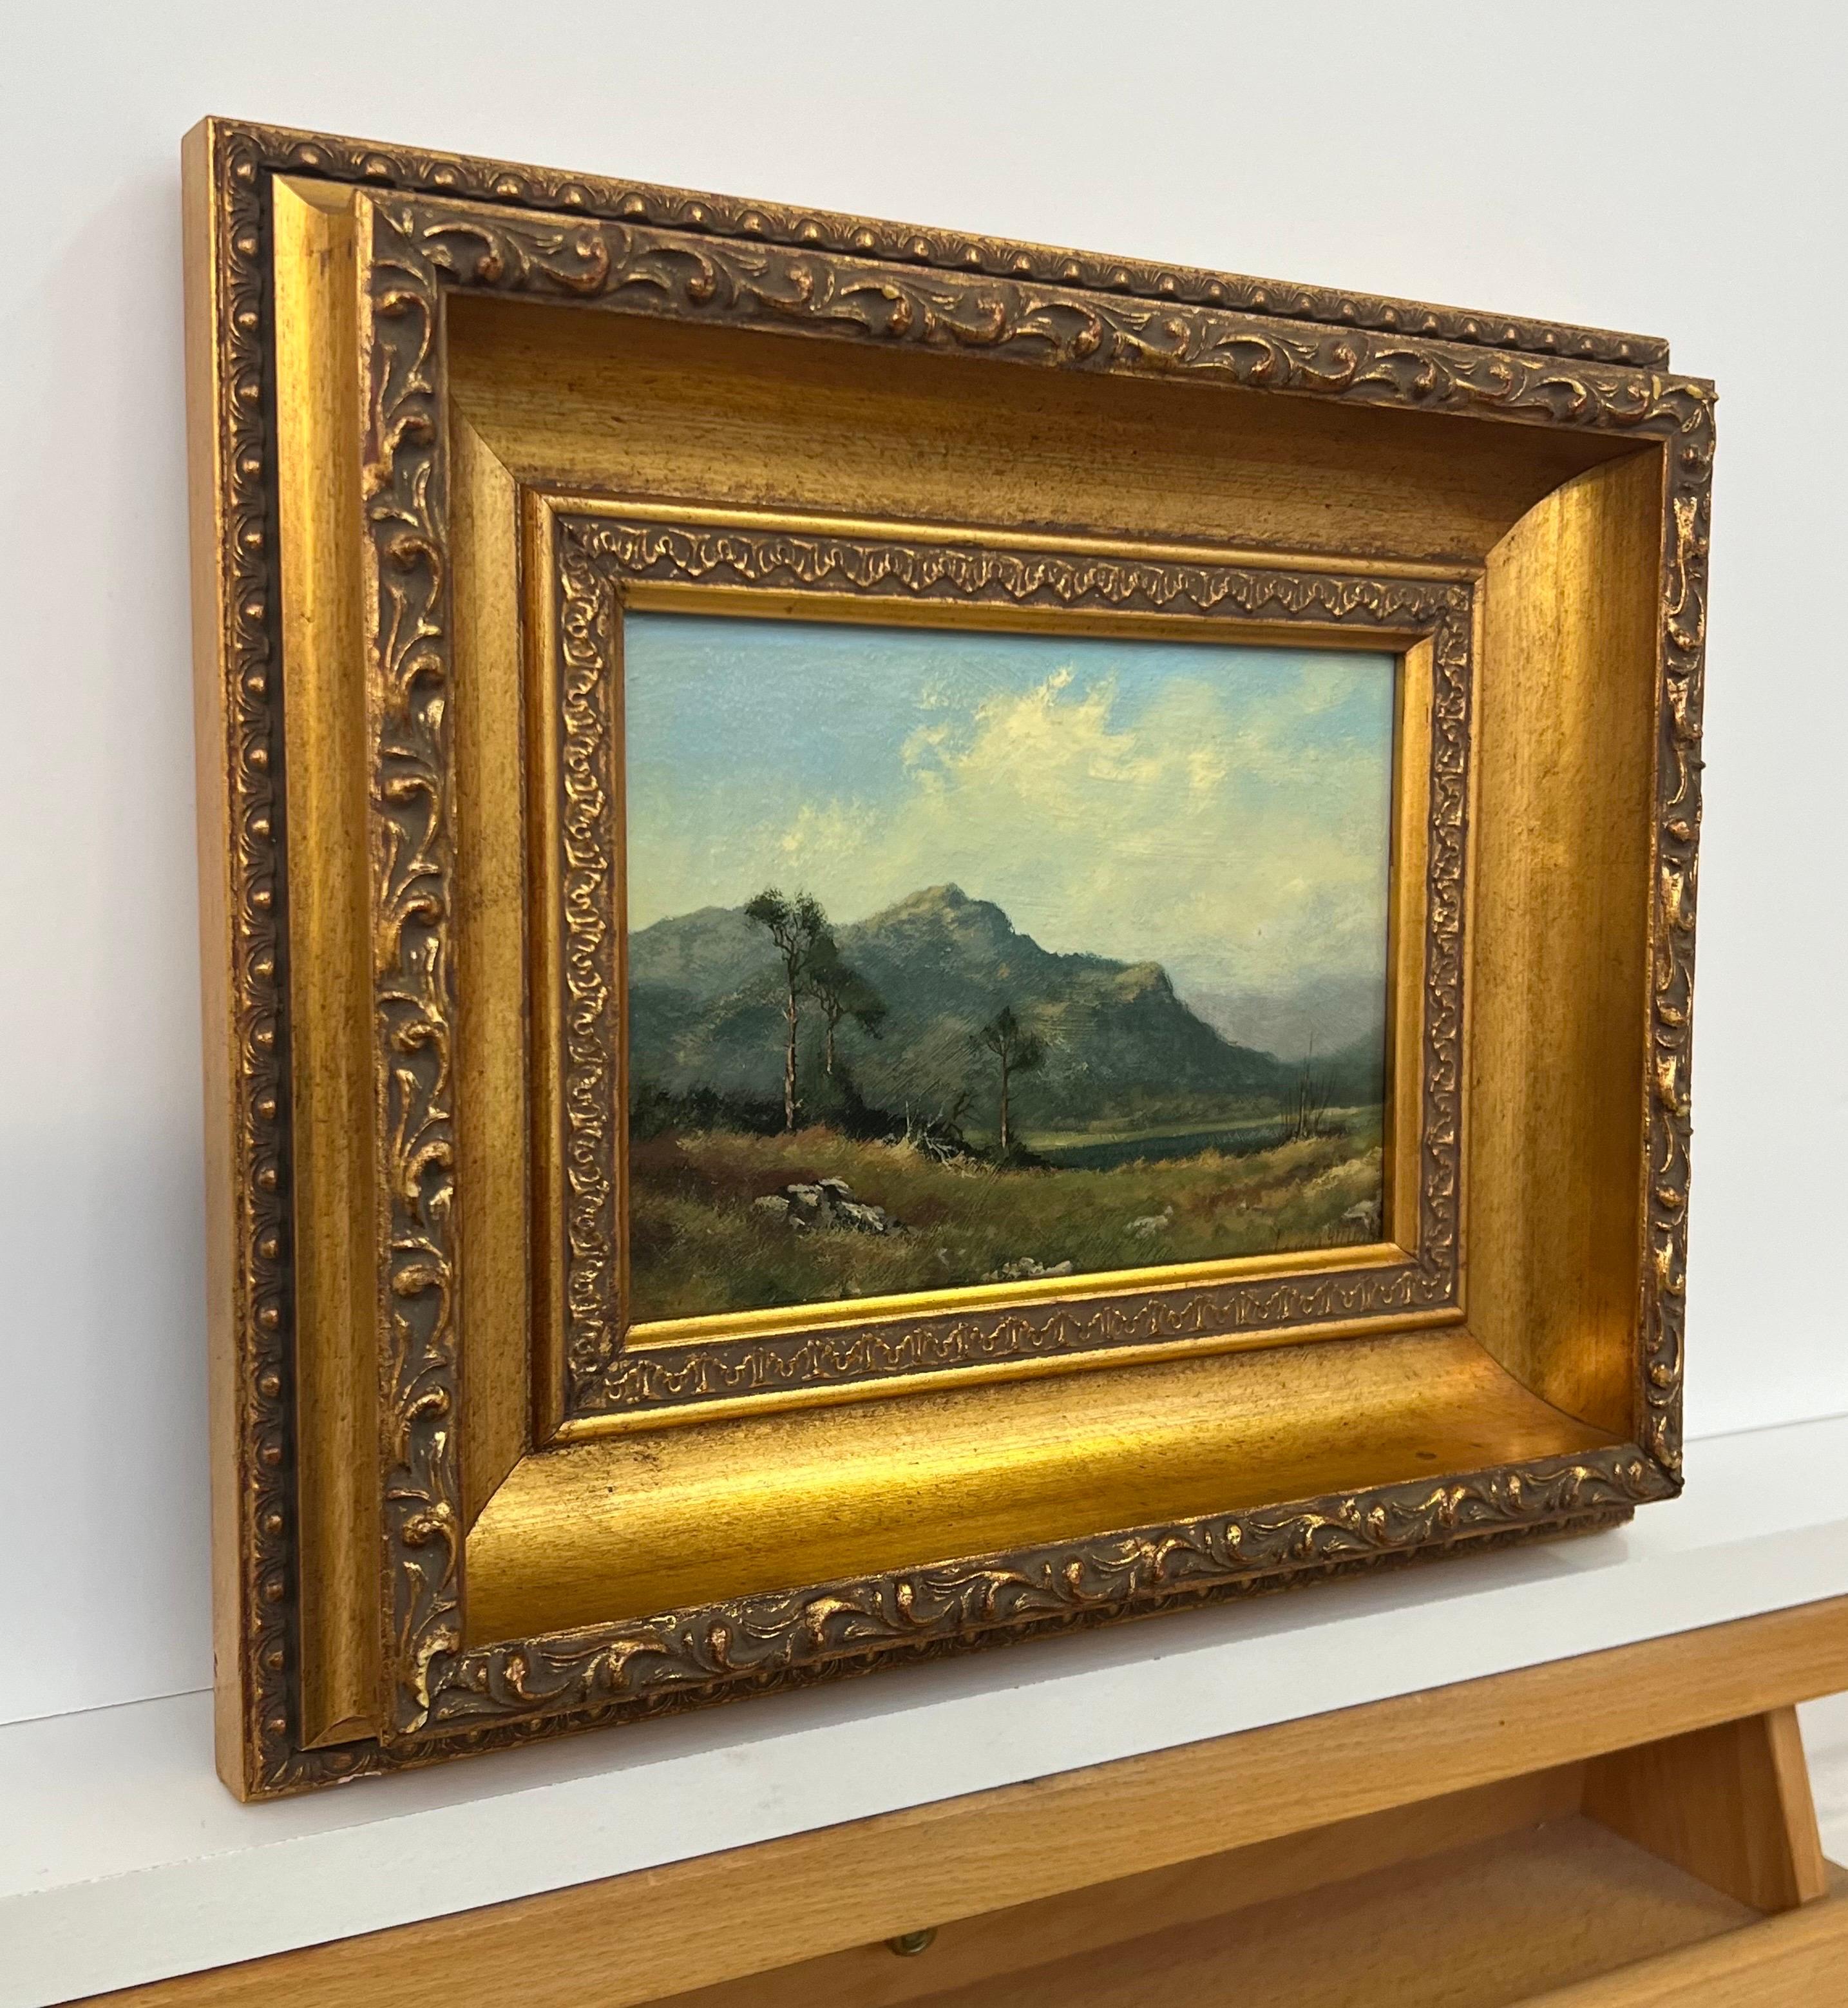 Painting of a Mountain in Lake District England by 20th Century British Landscape Artist, James Wright. Signed, Original, Oil on Canvas, housed in a beautiful ornate gold frame. Provenance: Part of the English Heritage Series No.249

Art measures 7